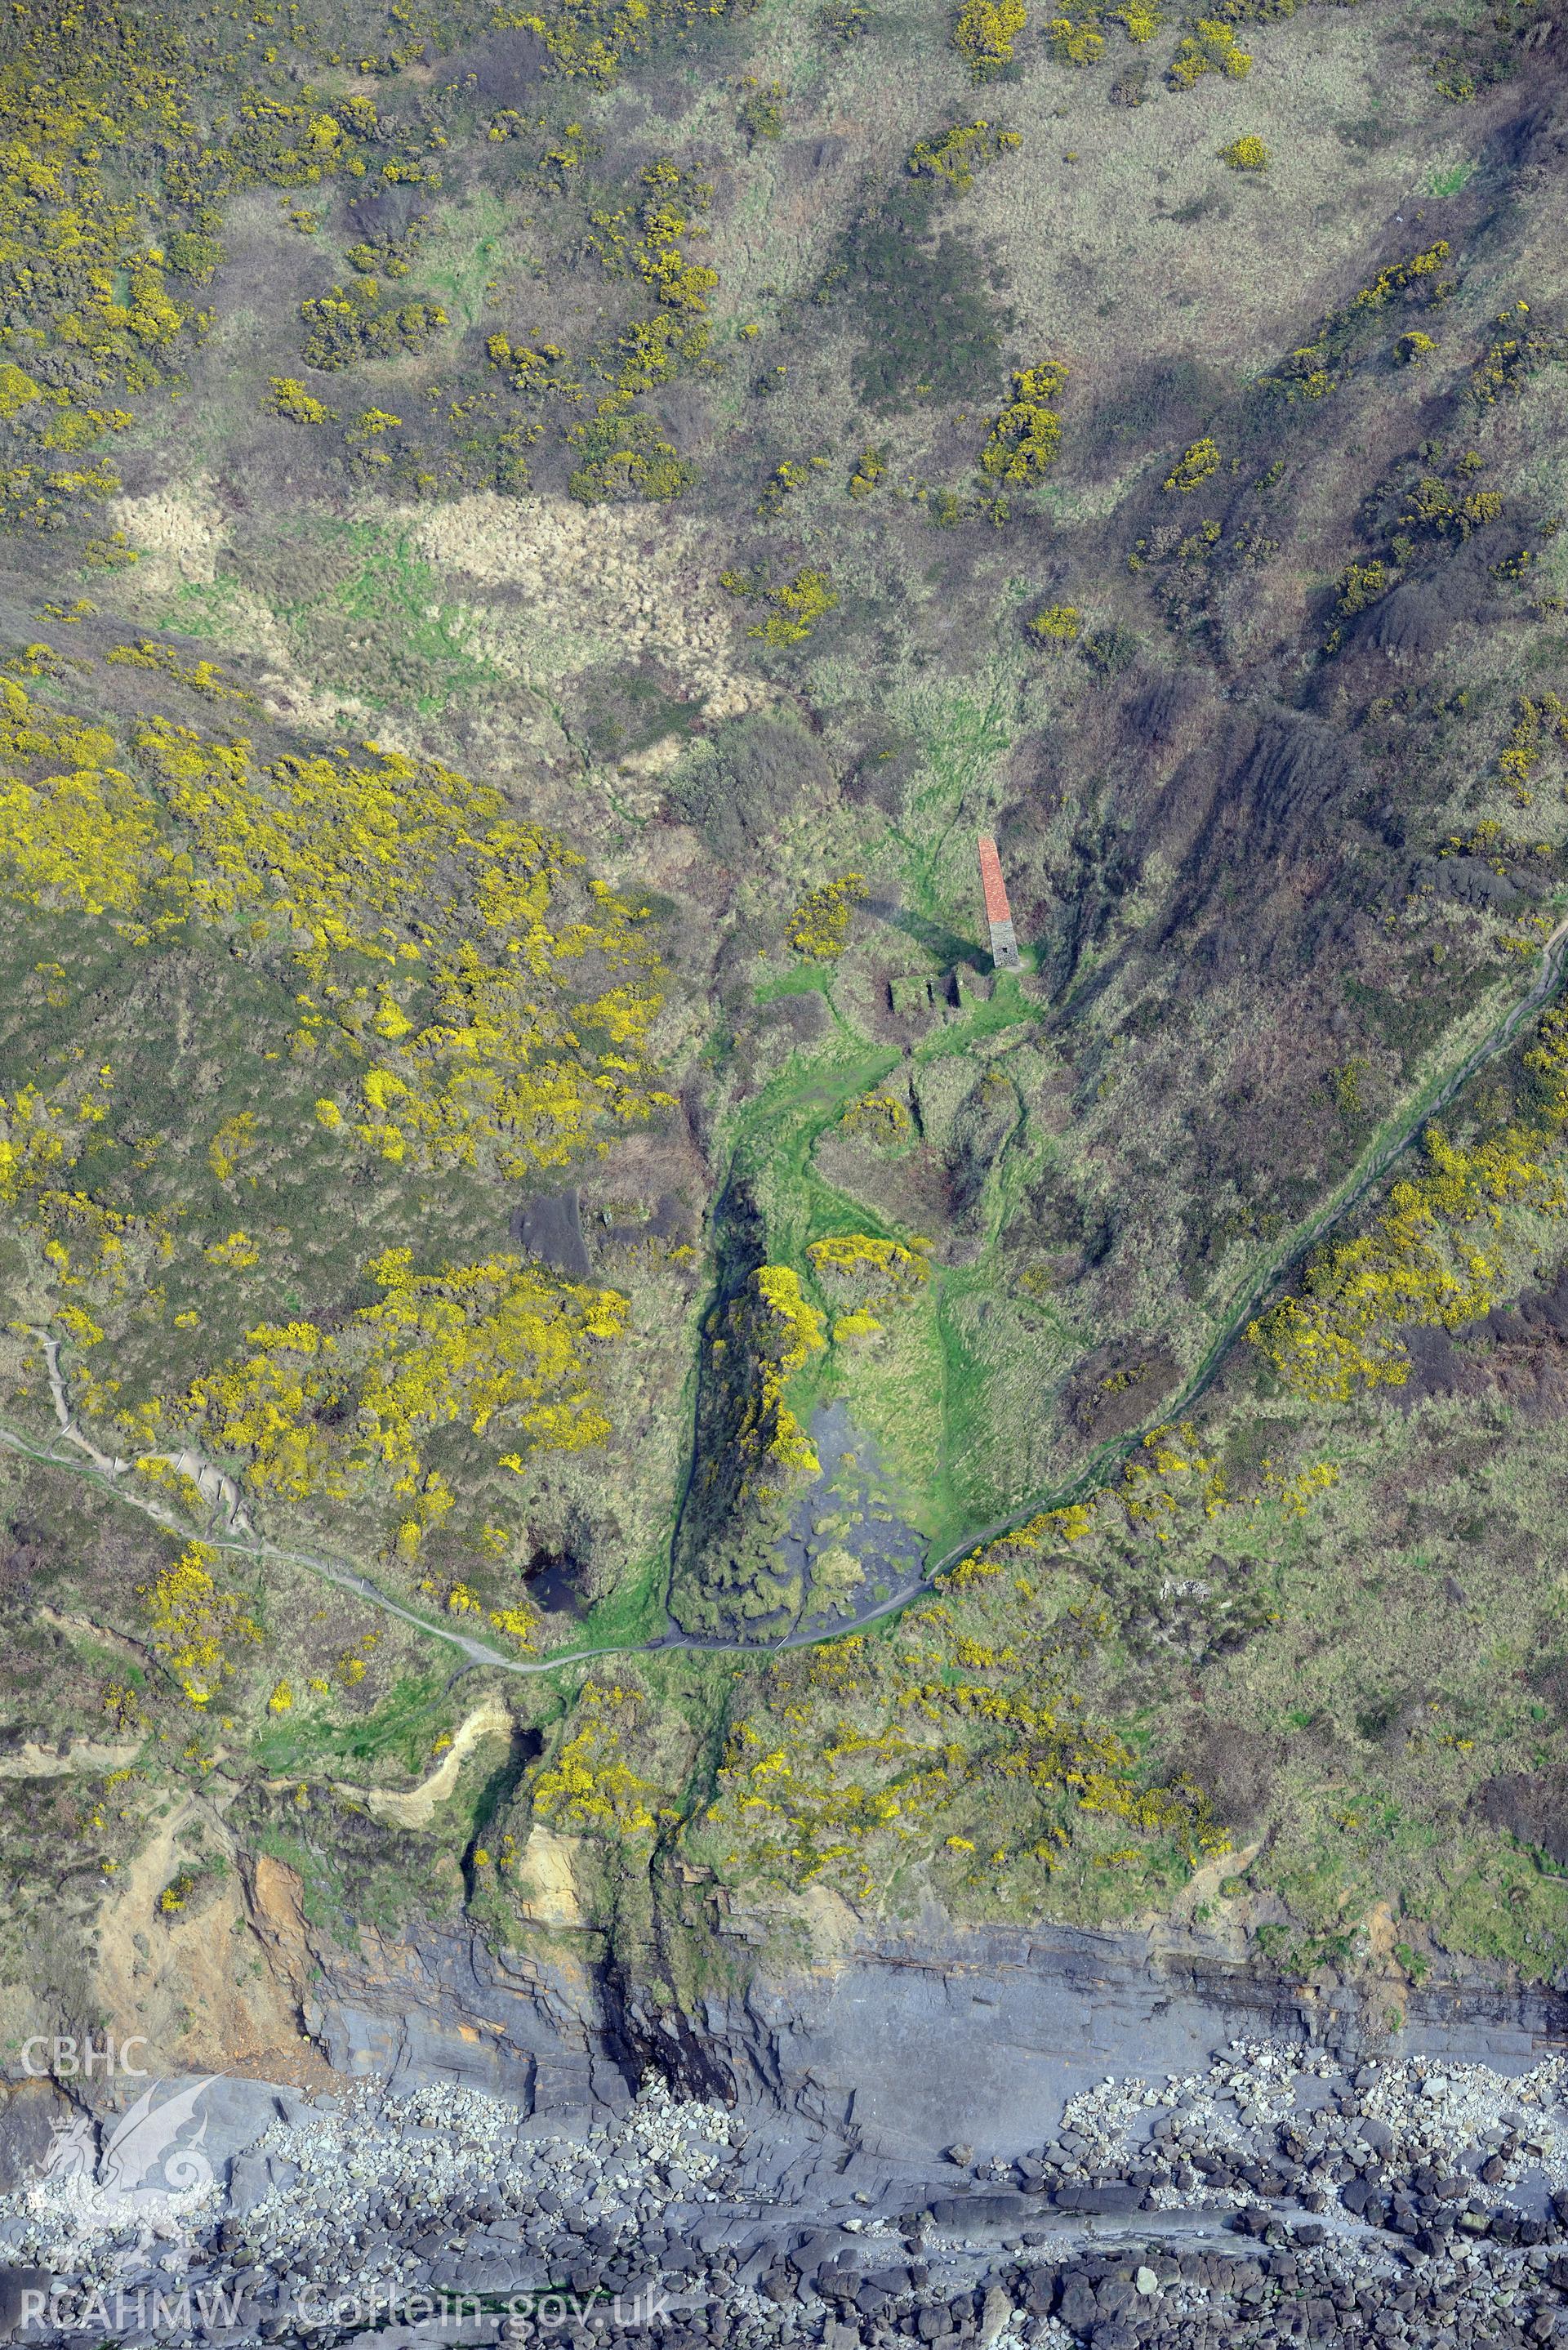 Aerial photography of Trefrane colliery taken on 27th March 2017. Baseline aerial reconnaissance survey for the CHERISH Project. ? Crown: CHERISH PROJECT 2019. Produced with EU funds through the Ireland Wales Co-operation Programme 2014-2020. All material made freely available through the Open Government Licence.